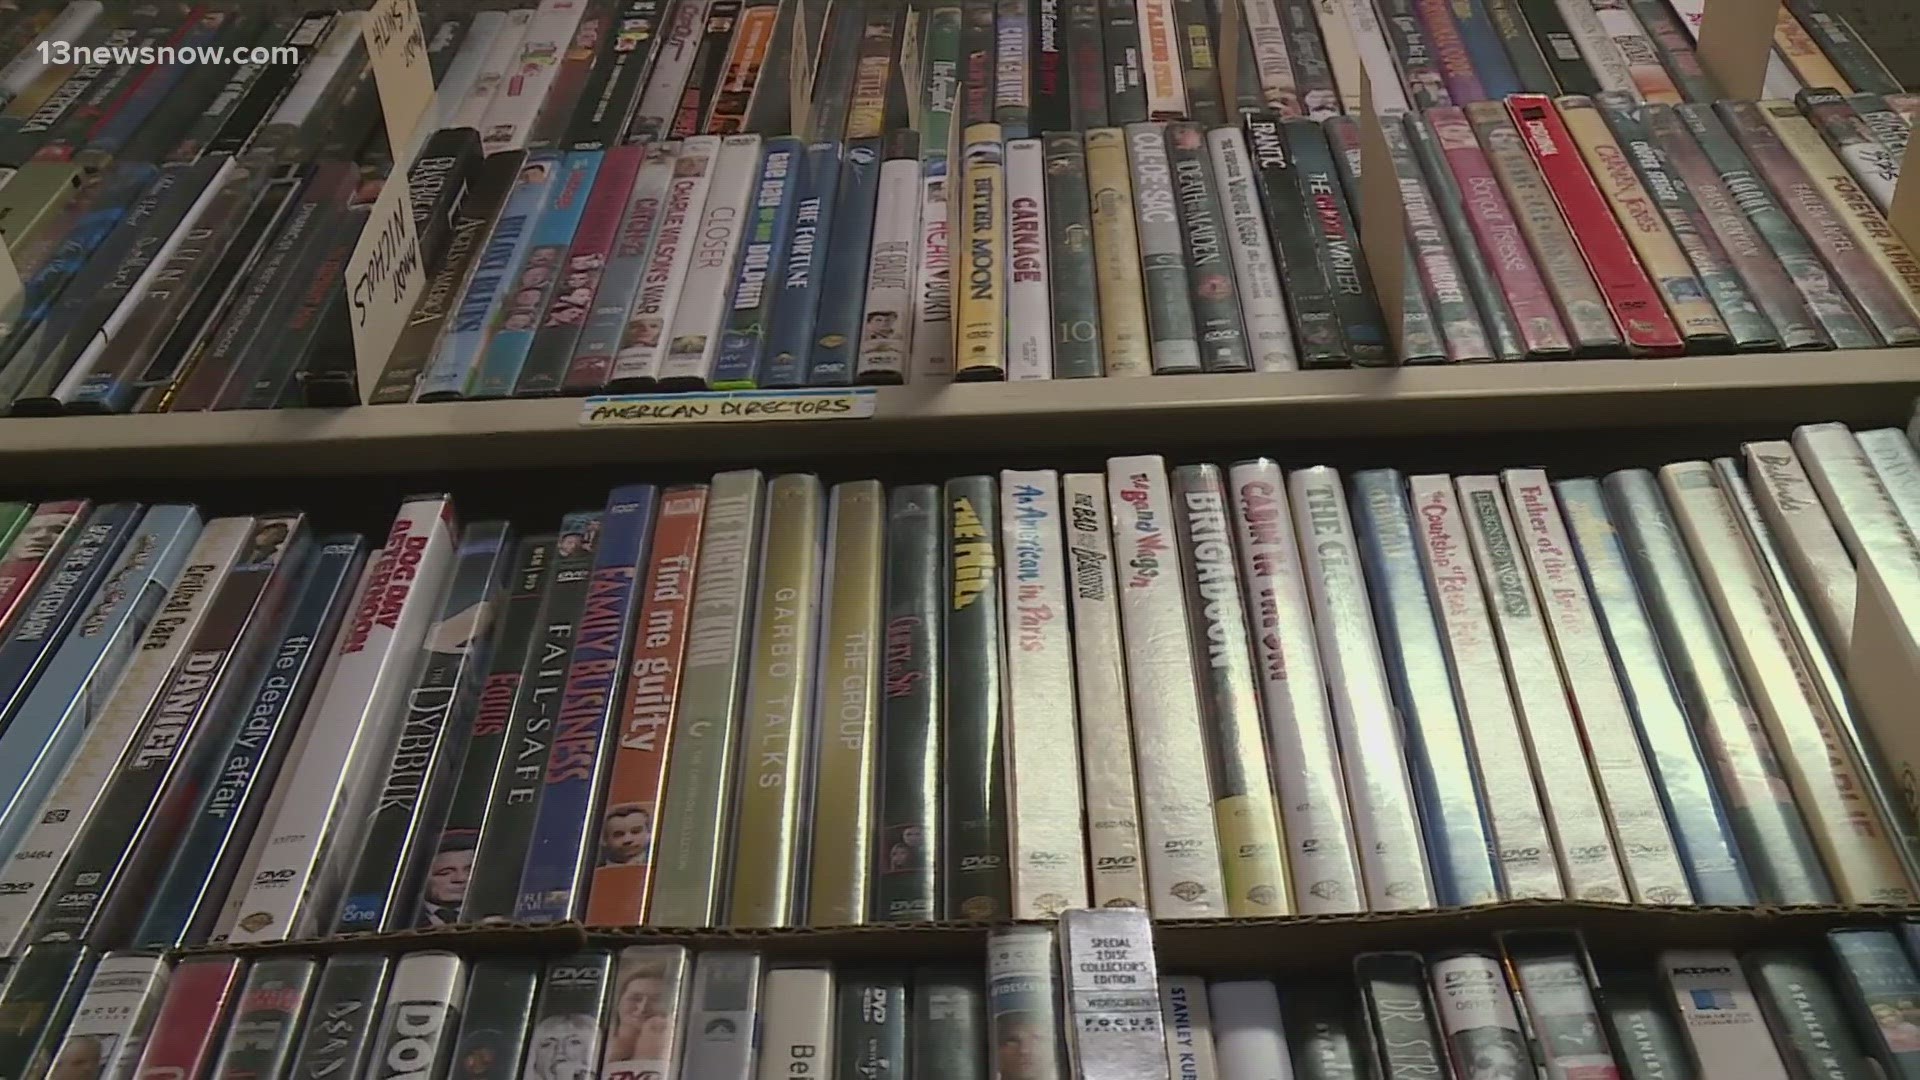 More than 40,000 films that once squeezed into the beloved Naro Expanded Video Store in Norfolk, are now back on the shelves.